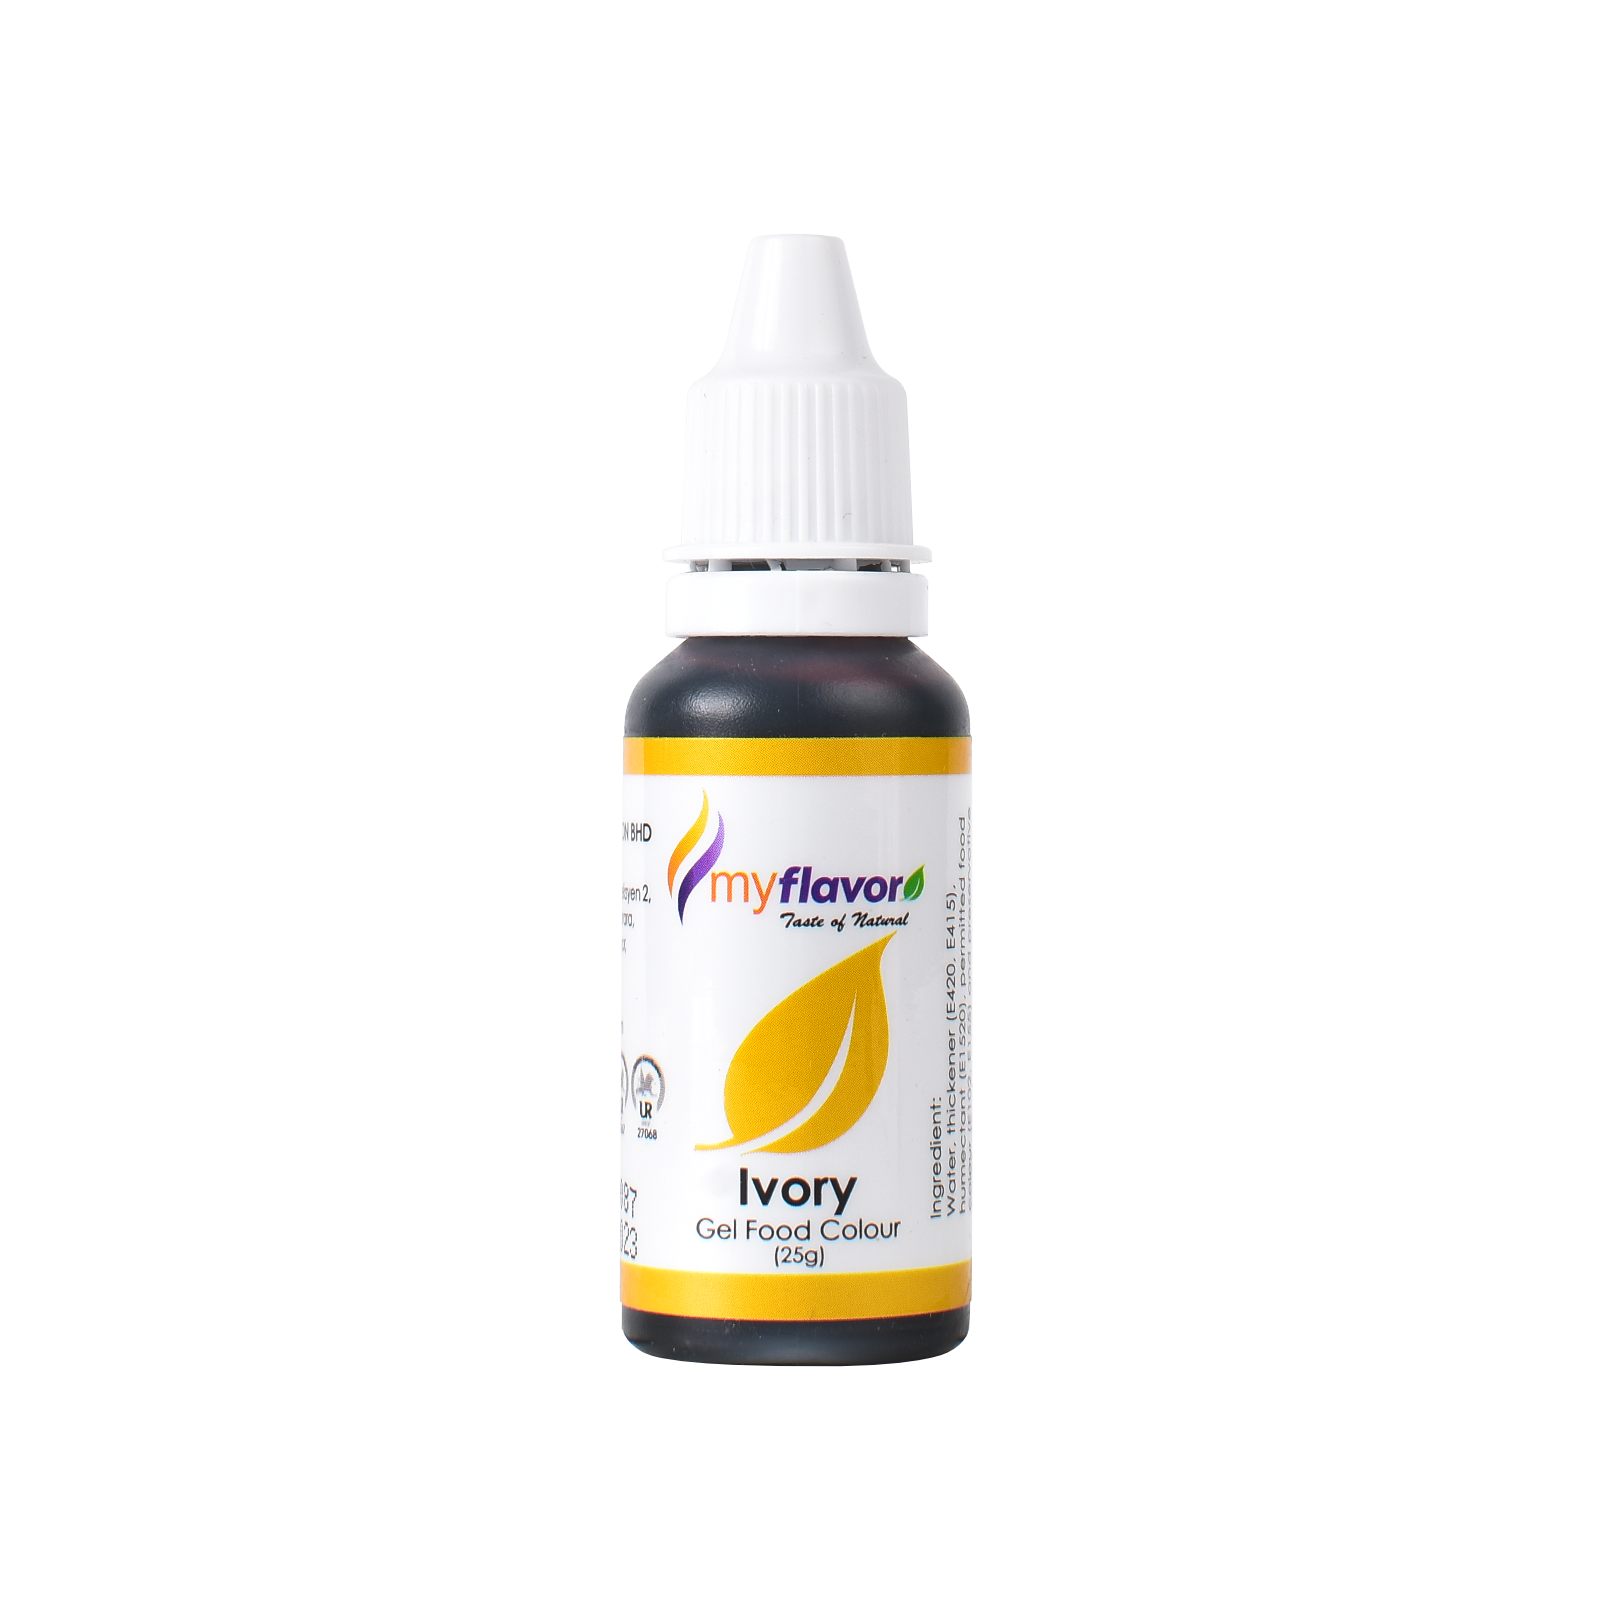 My Flavor Ivory Gel Food Colour 25g.png